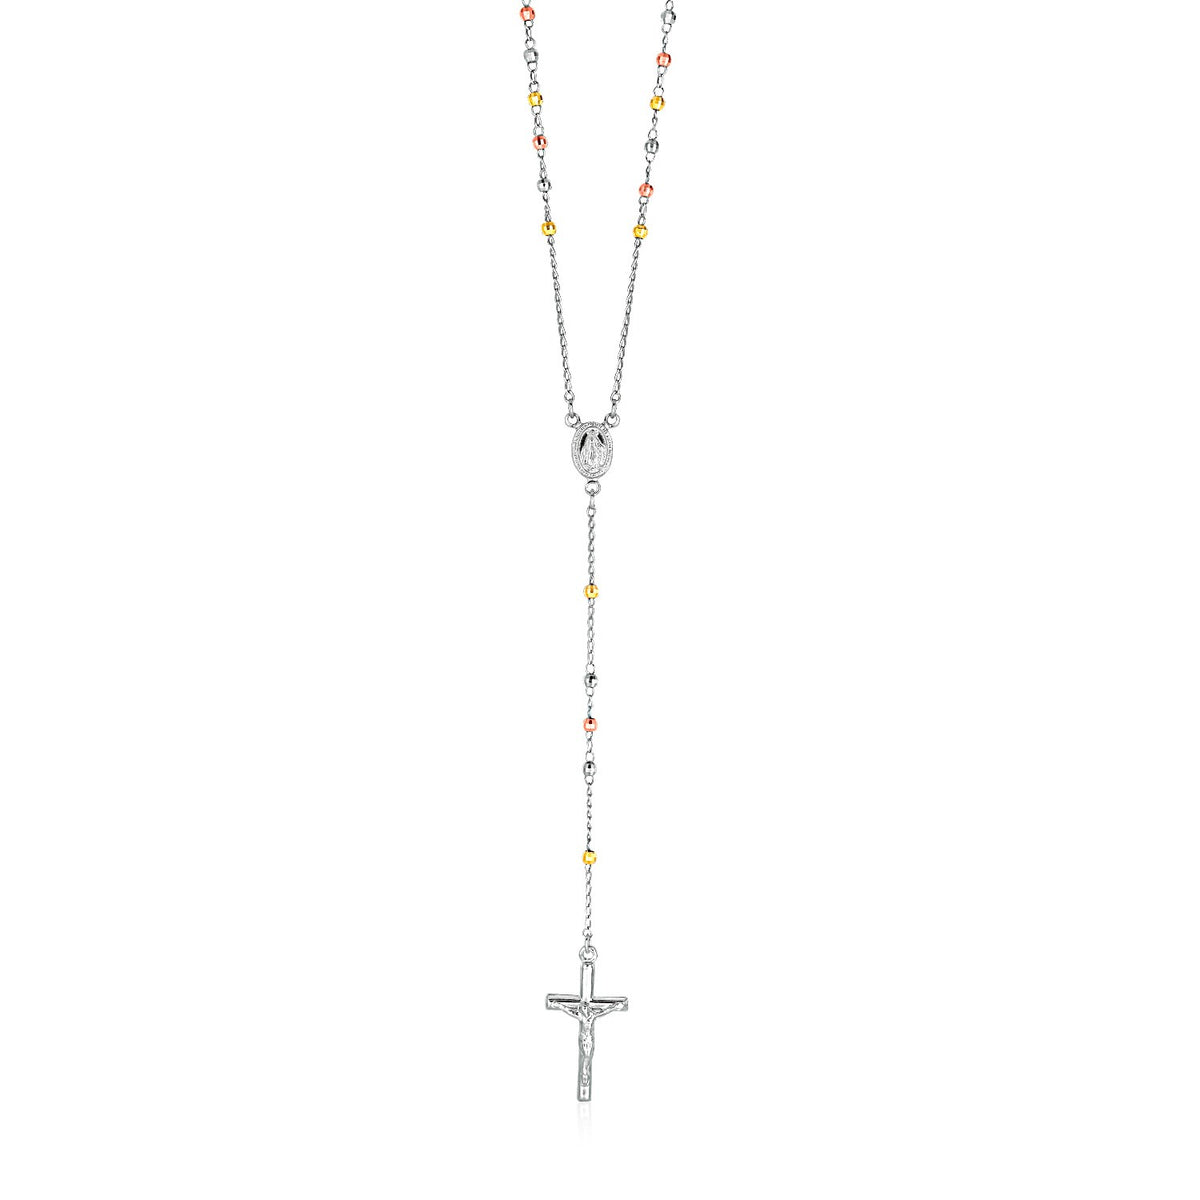 Rosary Chain and Bead Necklace - Sterling Silver